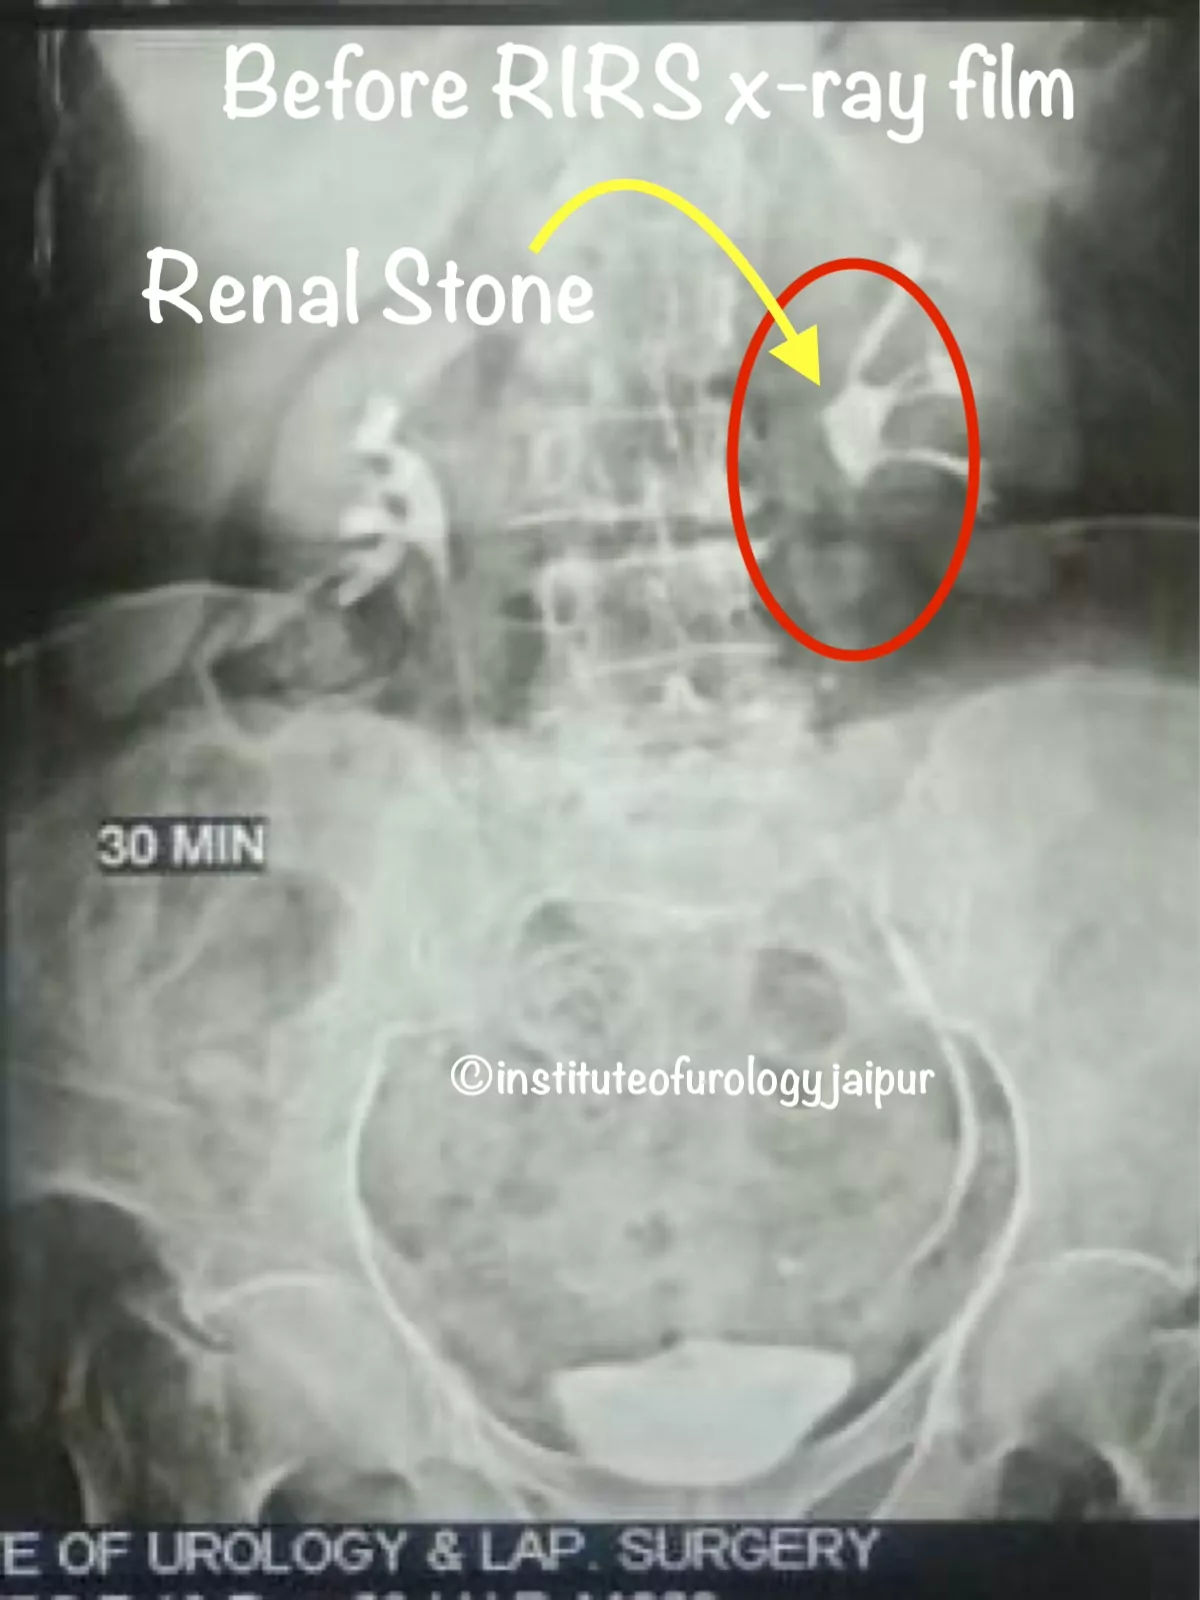 Best hospital for kidney stone treatment RIRS